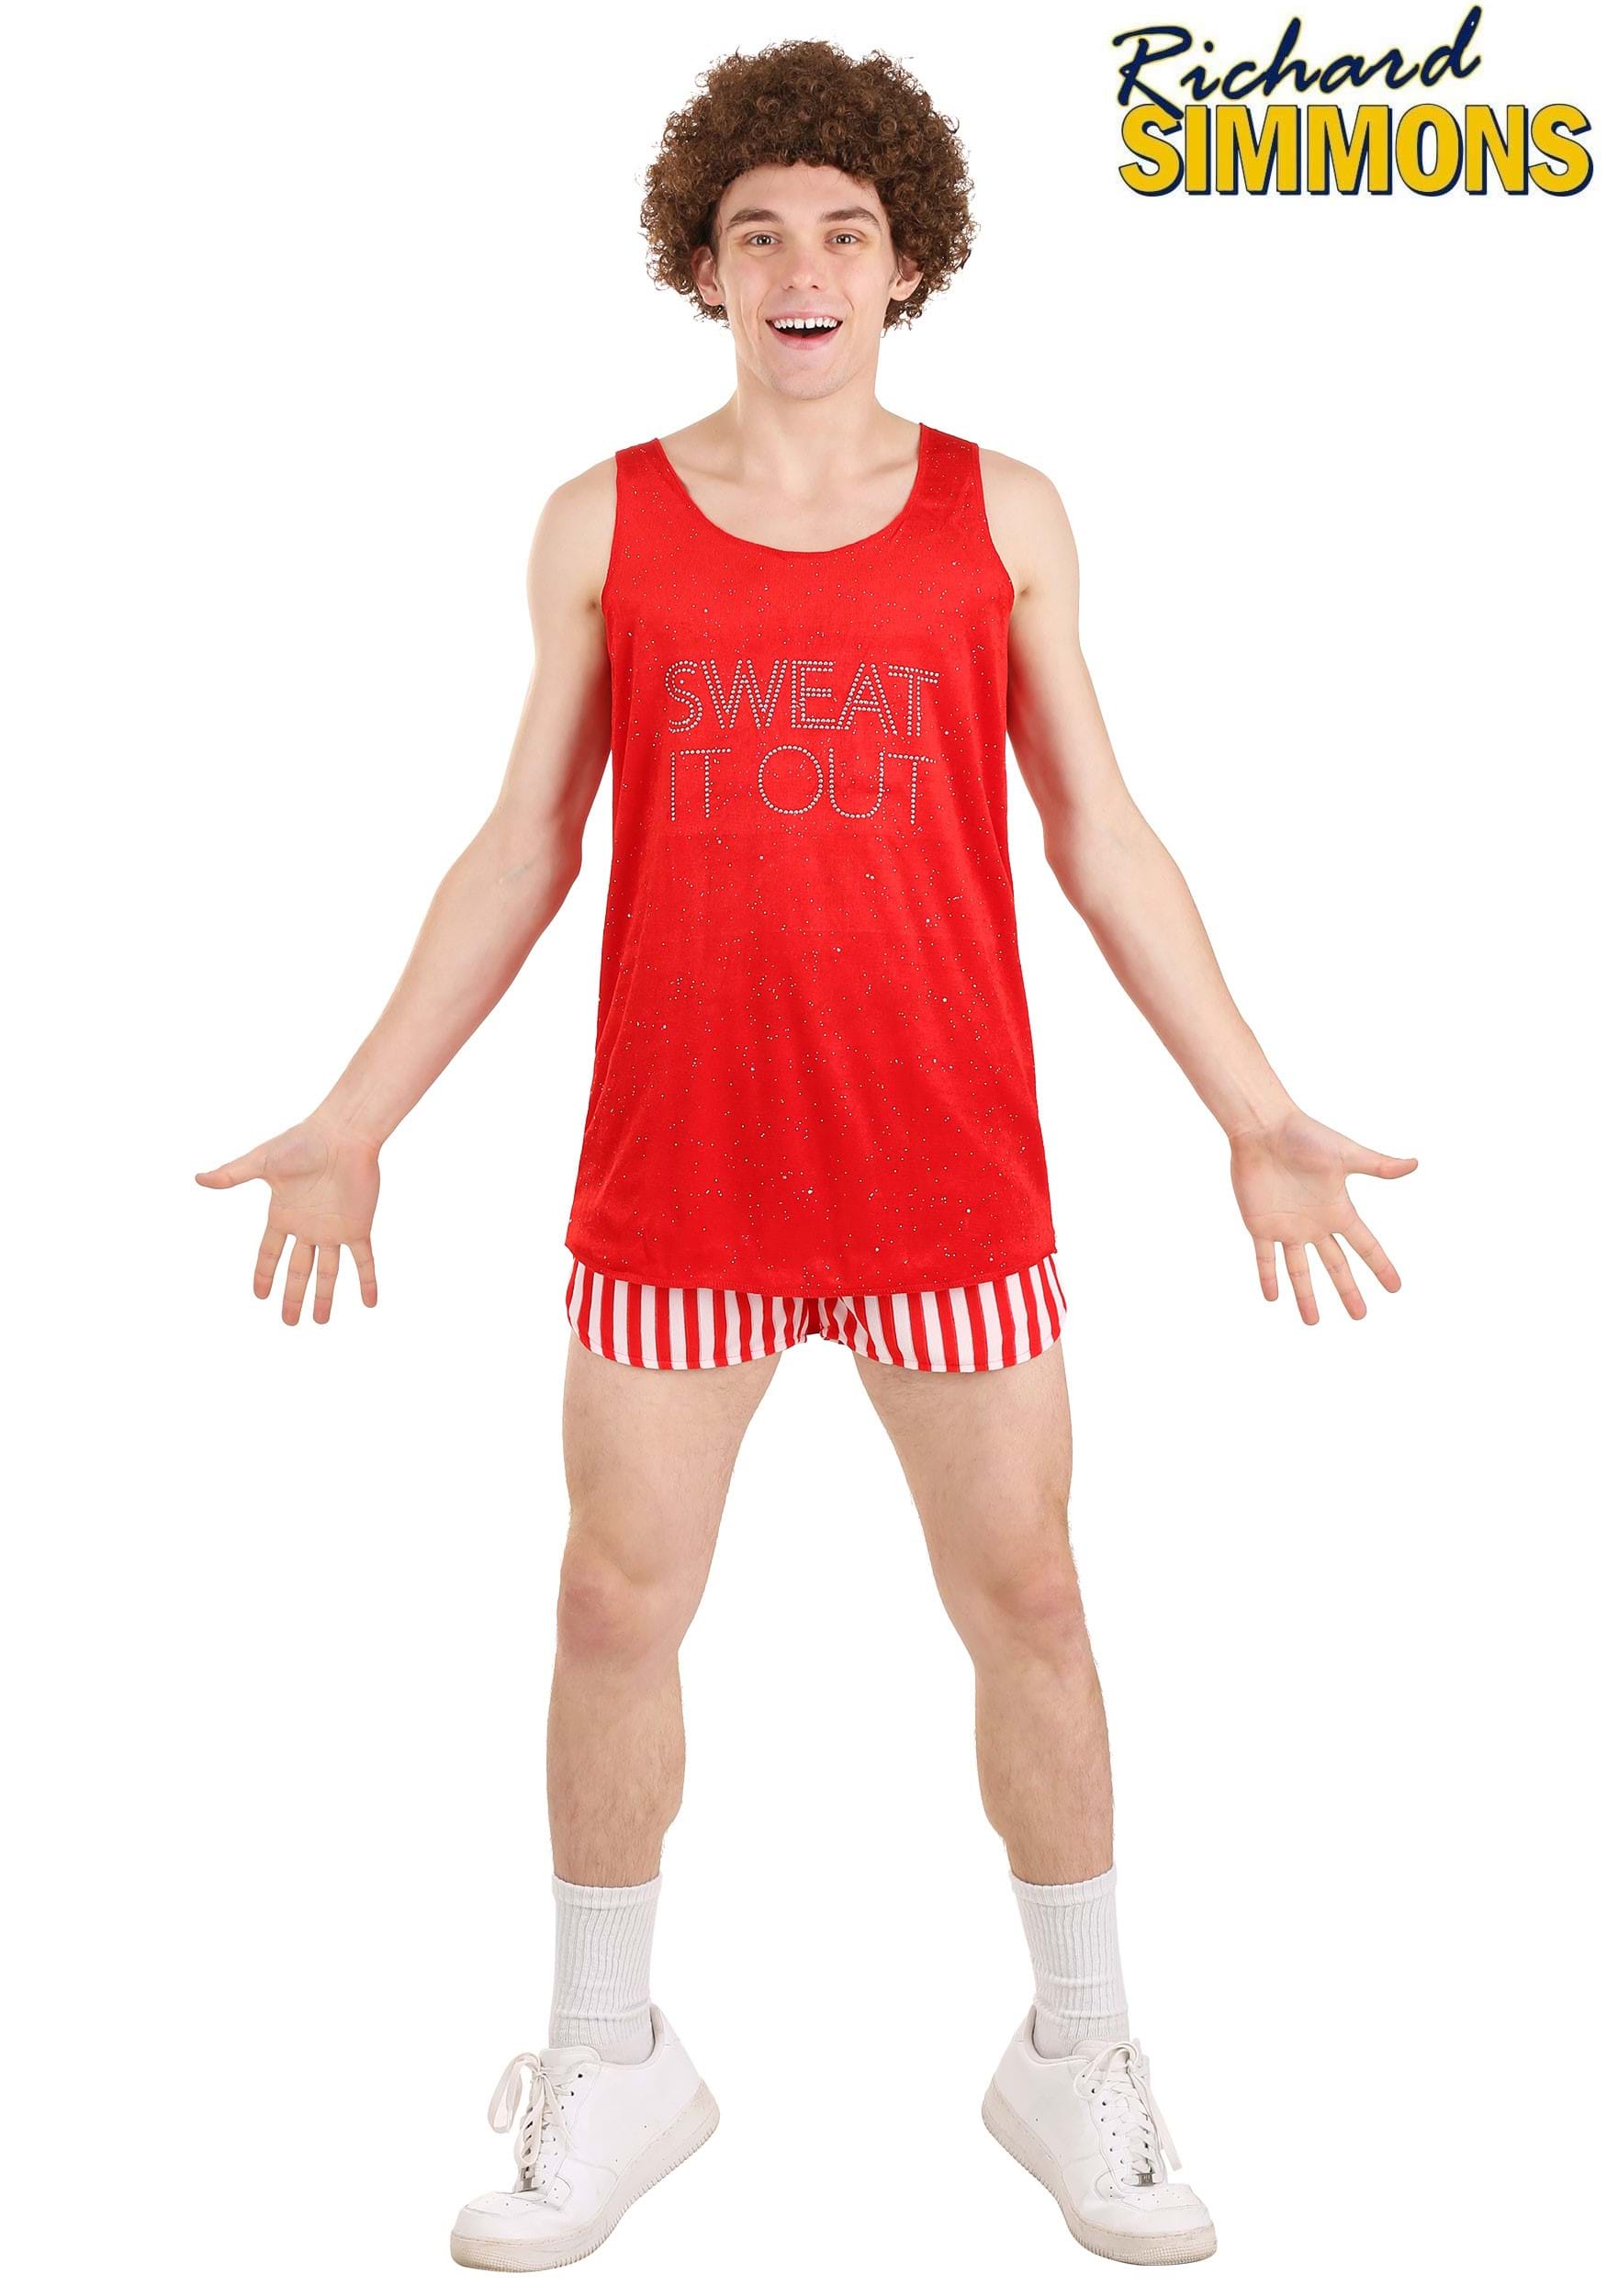 https://images.fun.com/products/5117/1-1/mens-richard-simmons-costume-main-upd.jpg